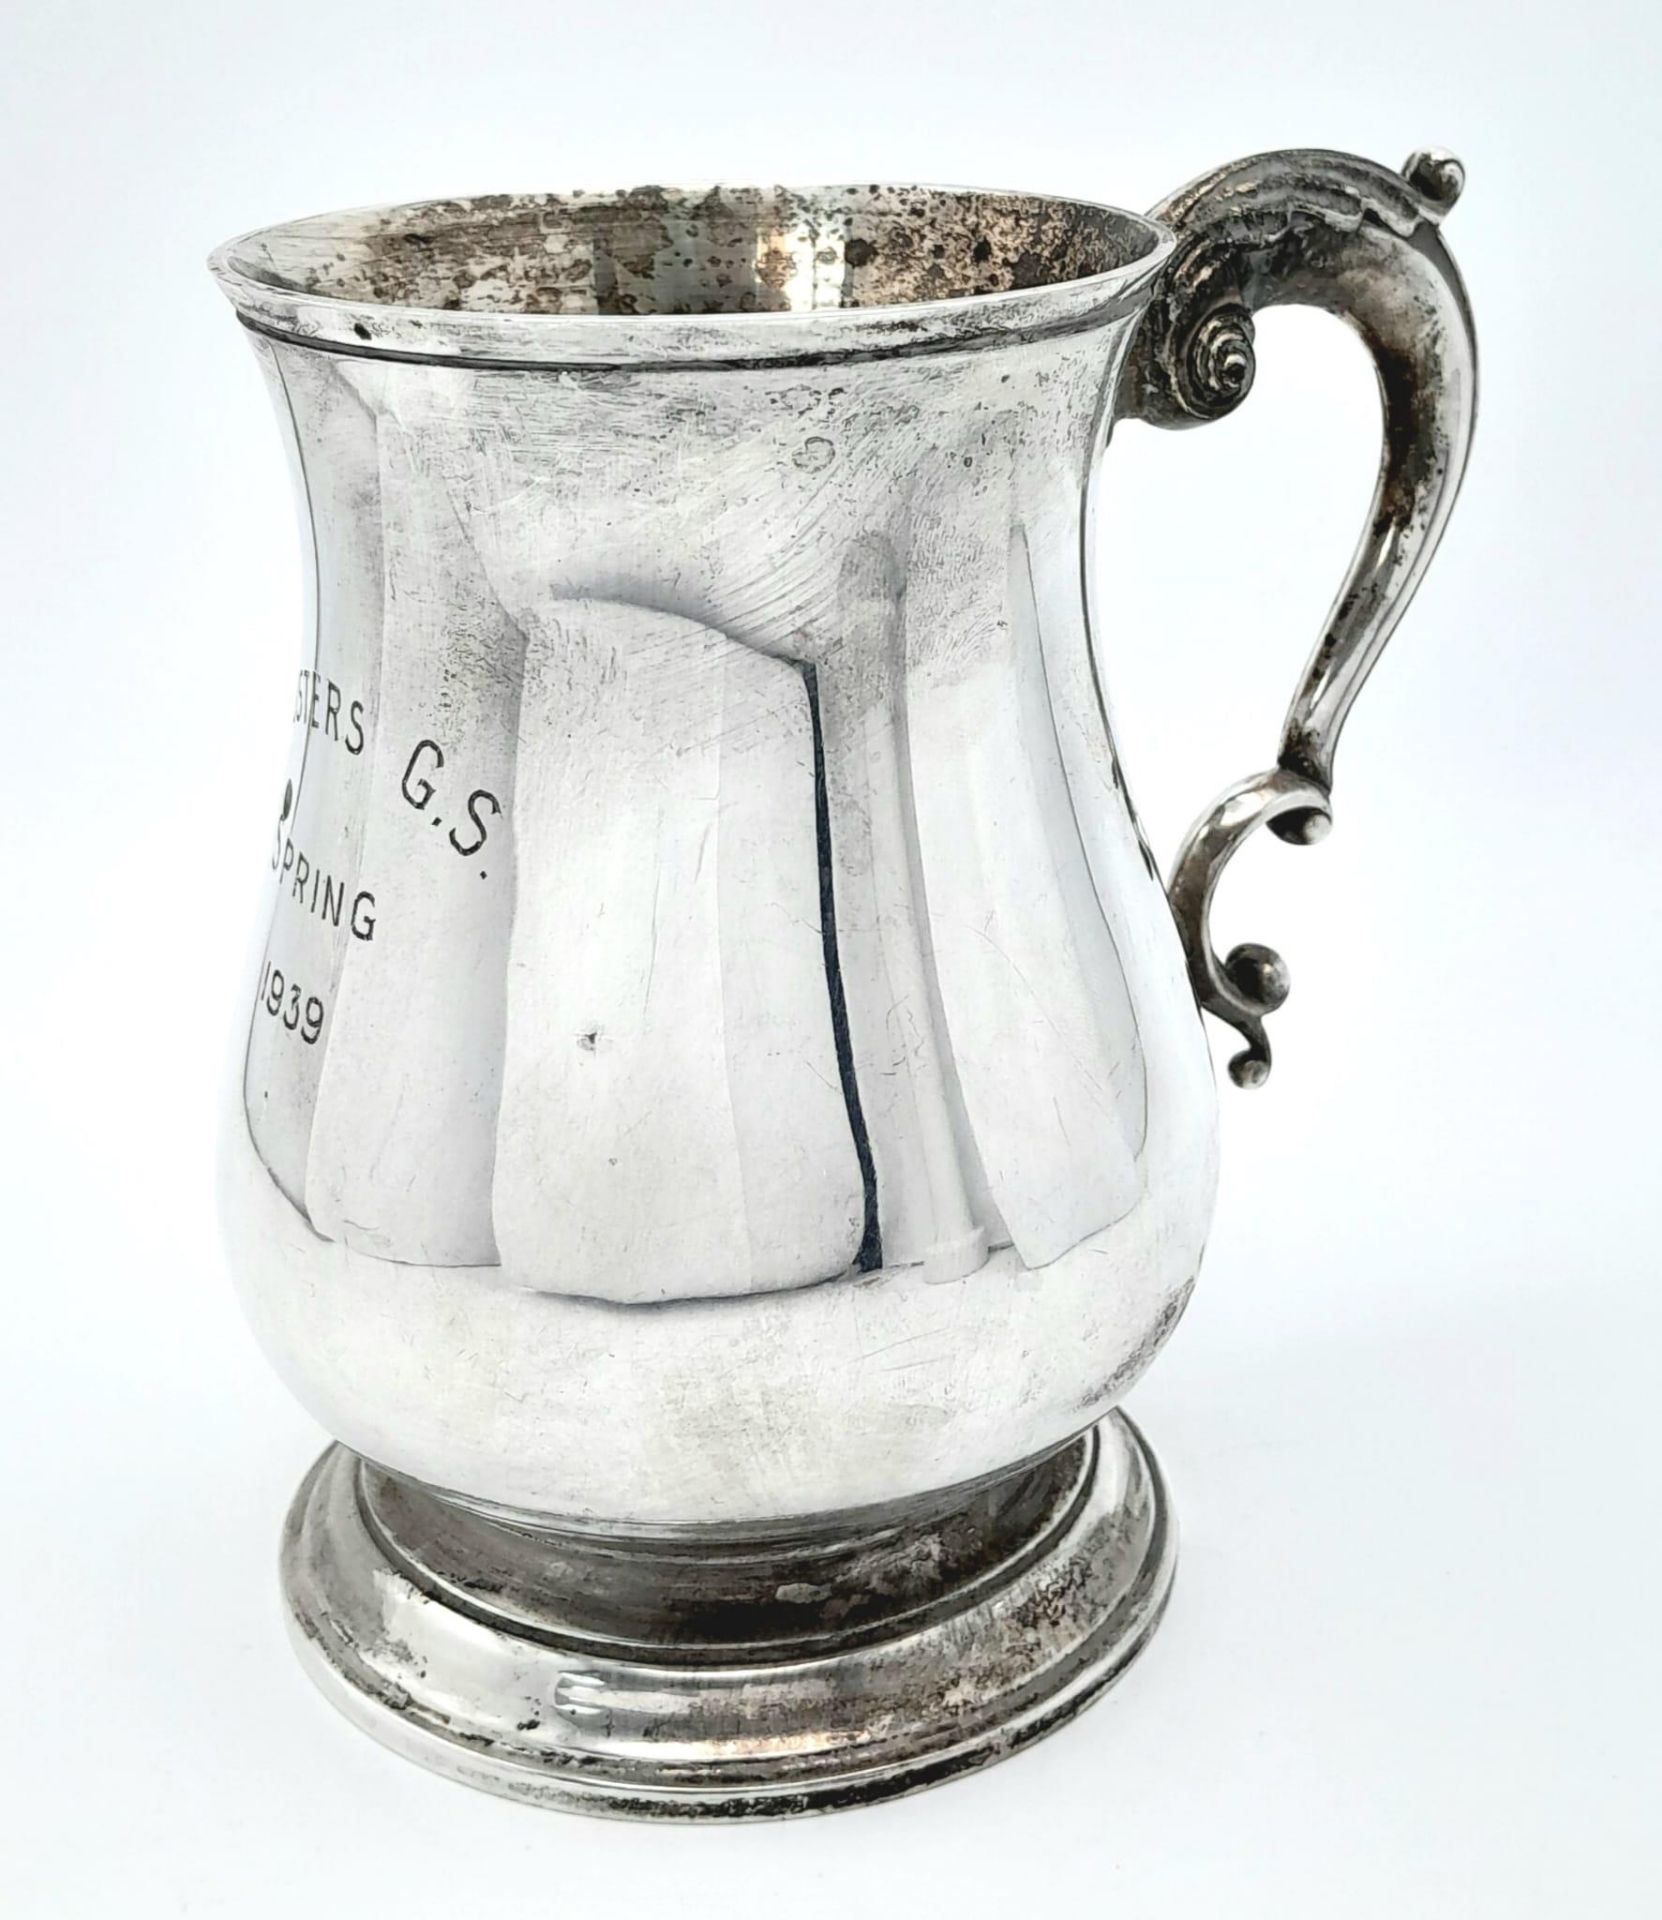 A Sterling Silver Tankard - Given to Gareth Smith of 'The Thrusters' - Winning regional darts team - Image 2 of 7